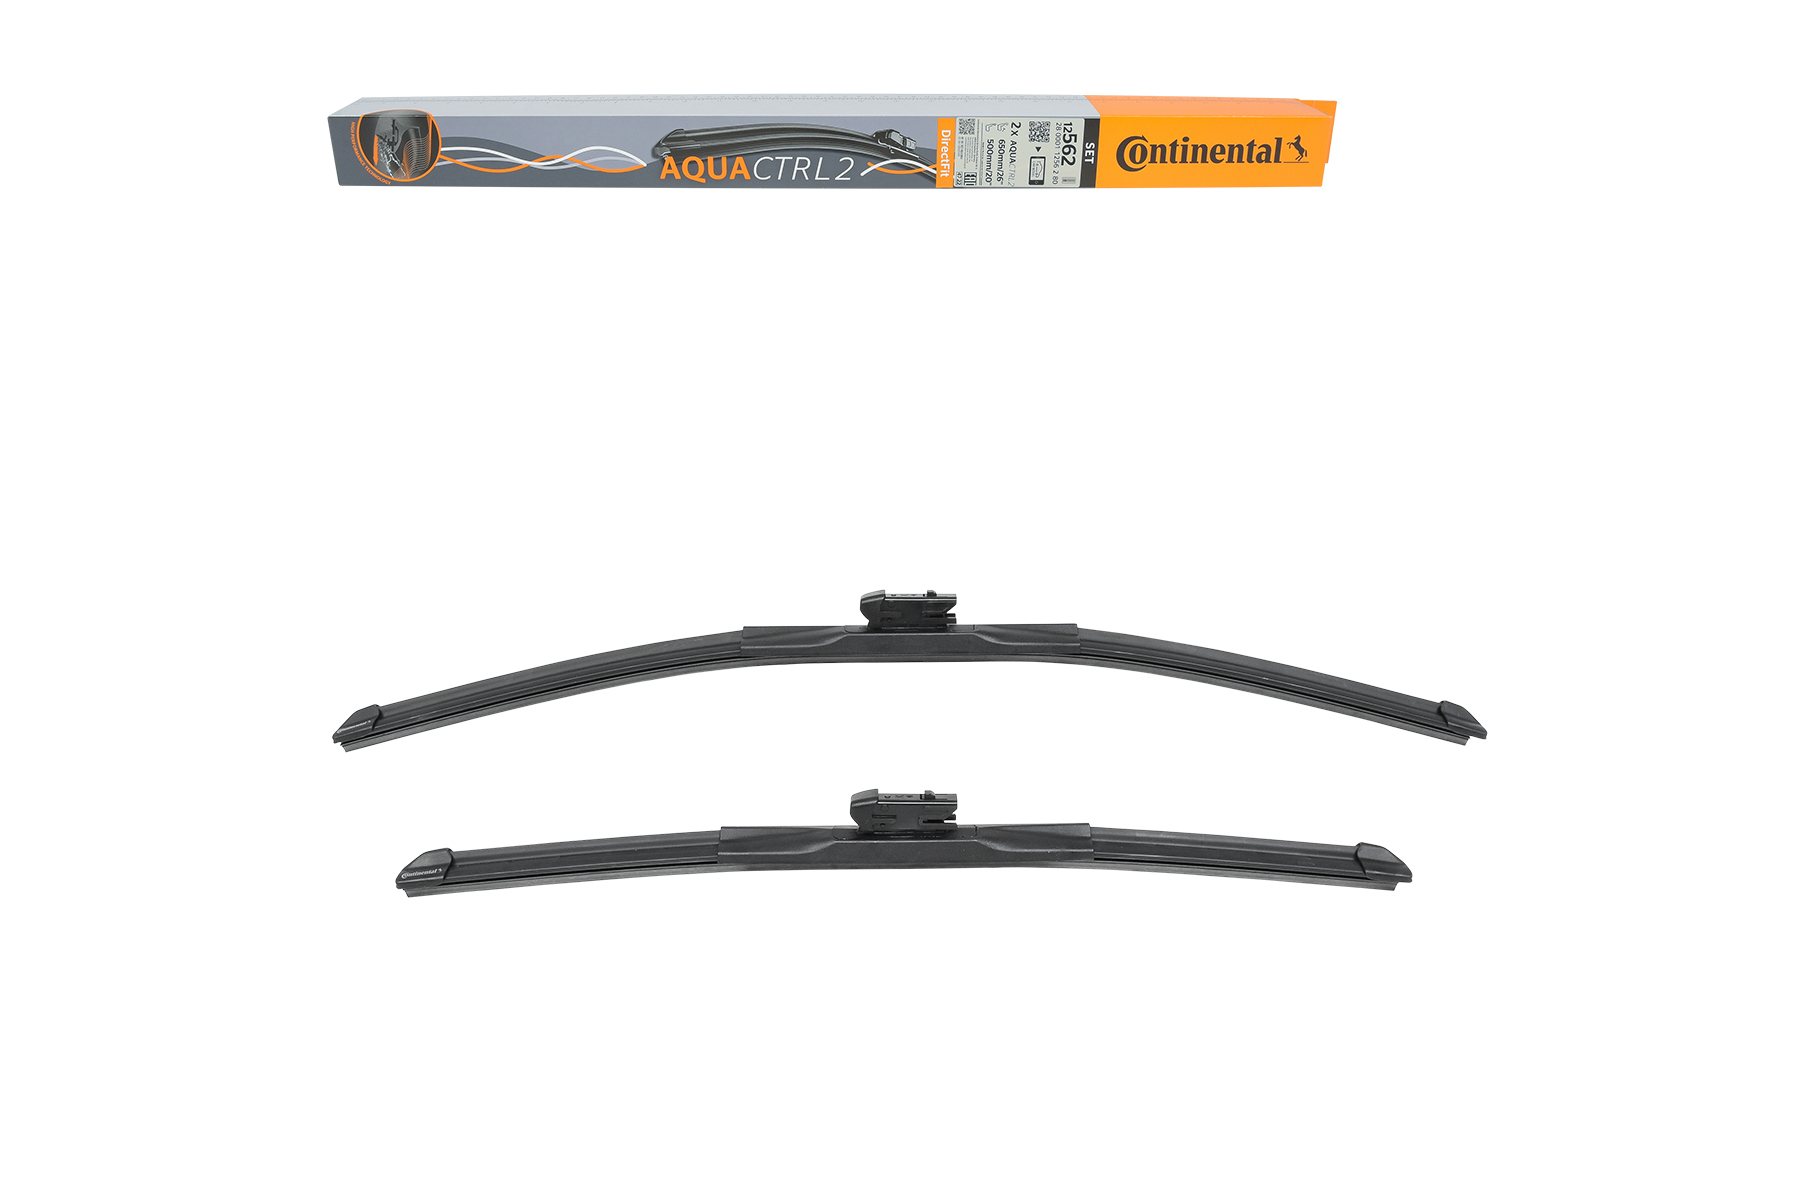 2800011256280 Continental Windscreen wipers JAGUAR 650, 500 mm Front, Flat wiper blade, with spoiler, 26/20 Inch